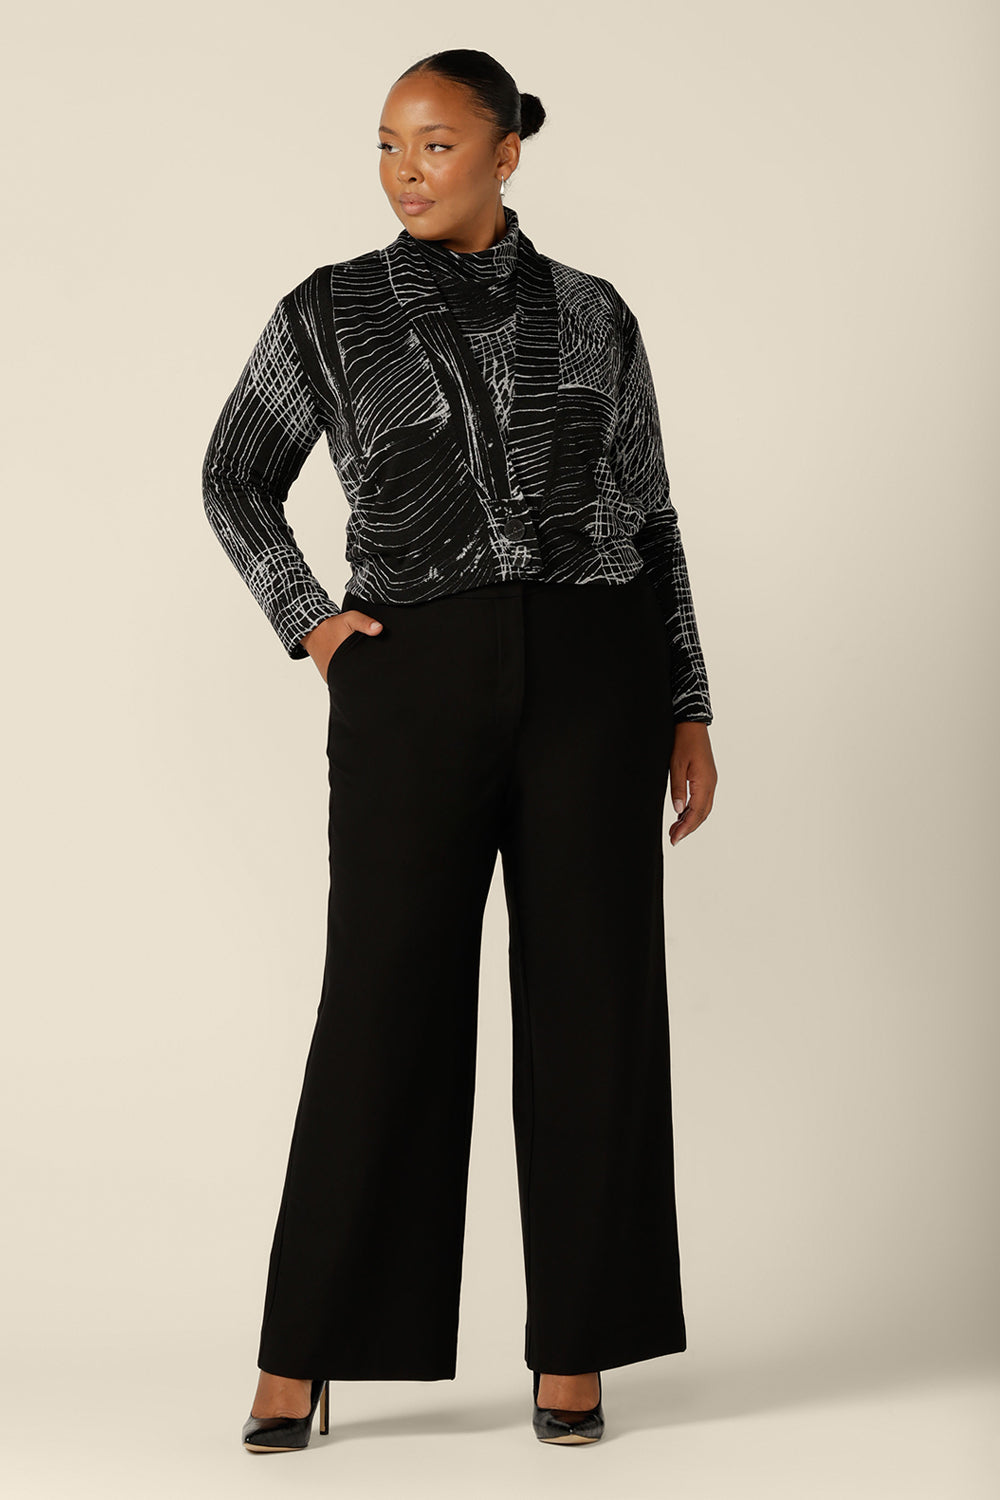 A blend of jacket and cardigan, this textured knit 'jacardi' is a good way to layer up for winter. Worn by a plus size, size 18 woman, this knit jacket is worn with tailored black trousers and a matching polo neck top to create a modern twinset for work wear and weekend wear.  